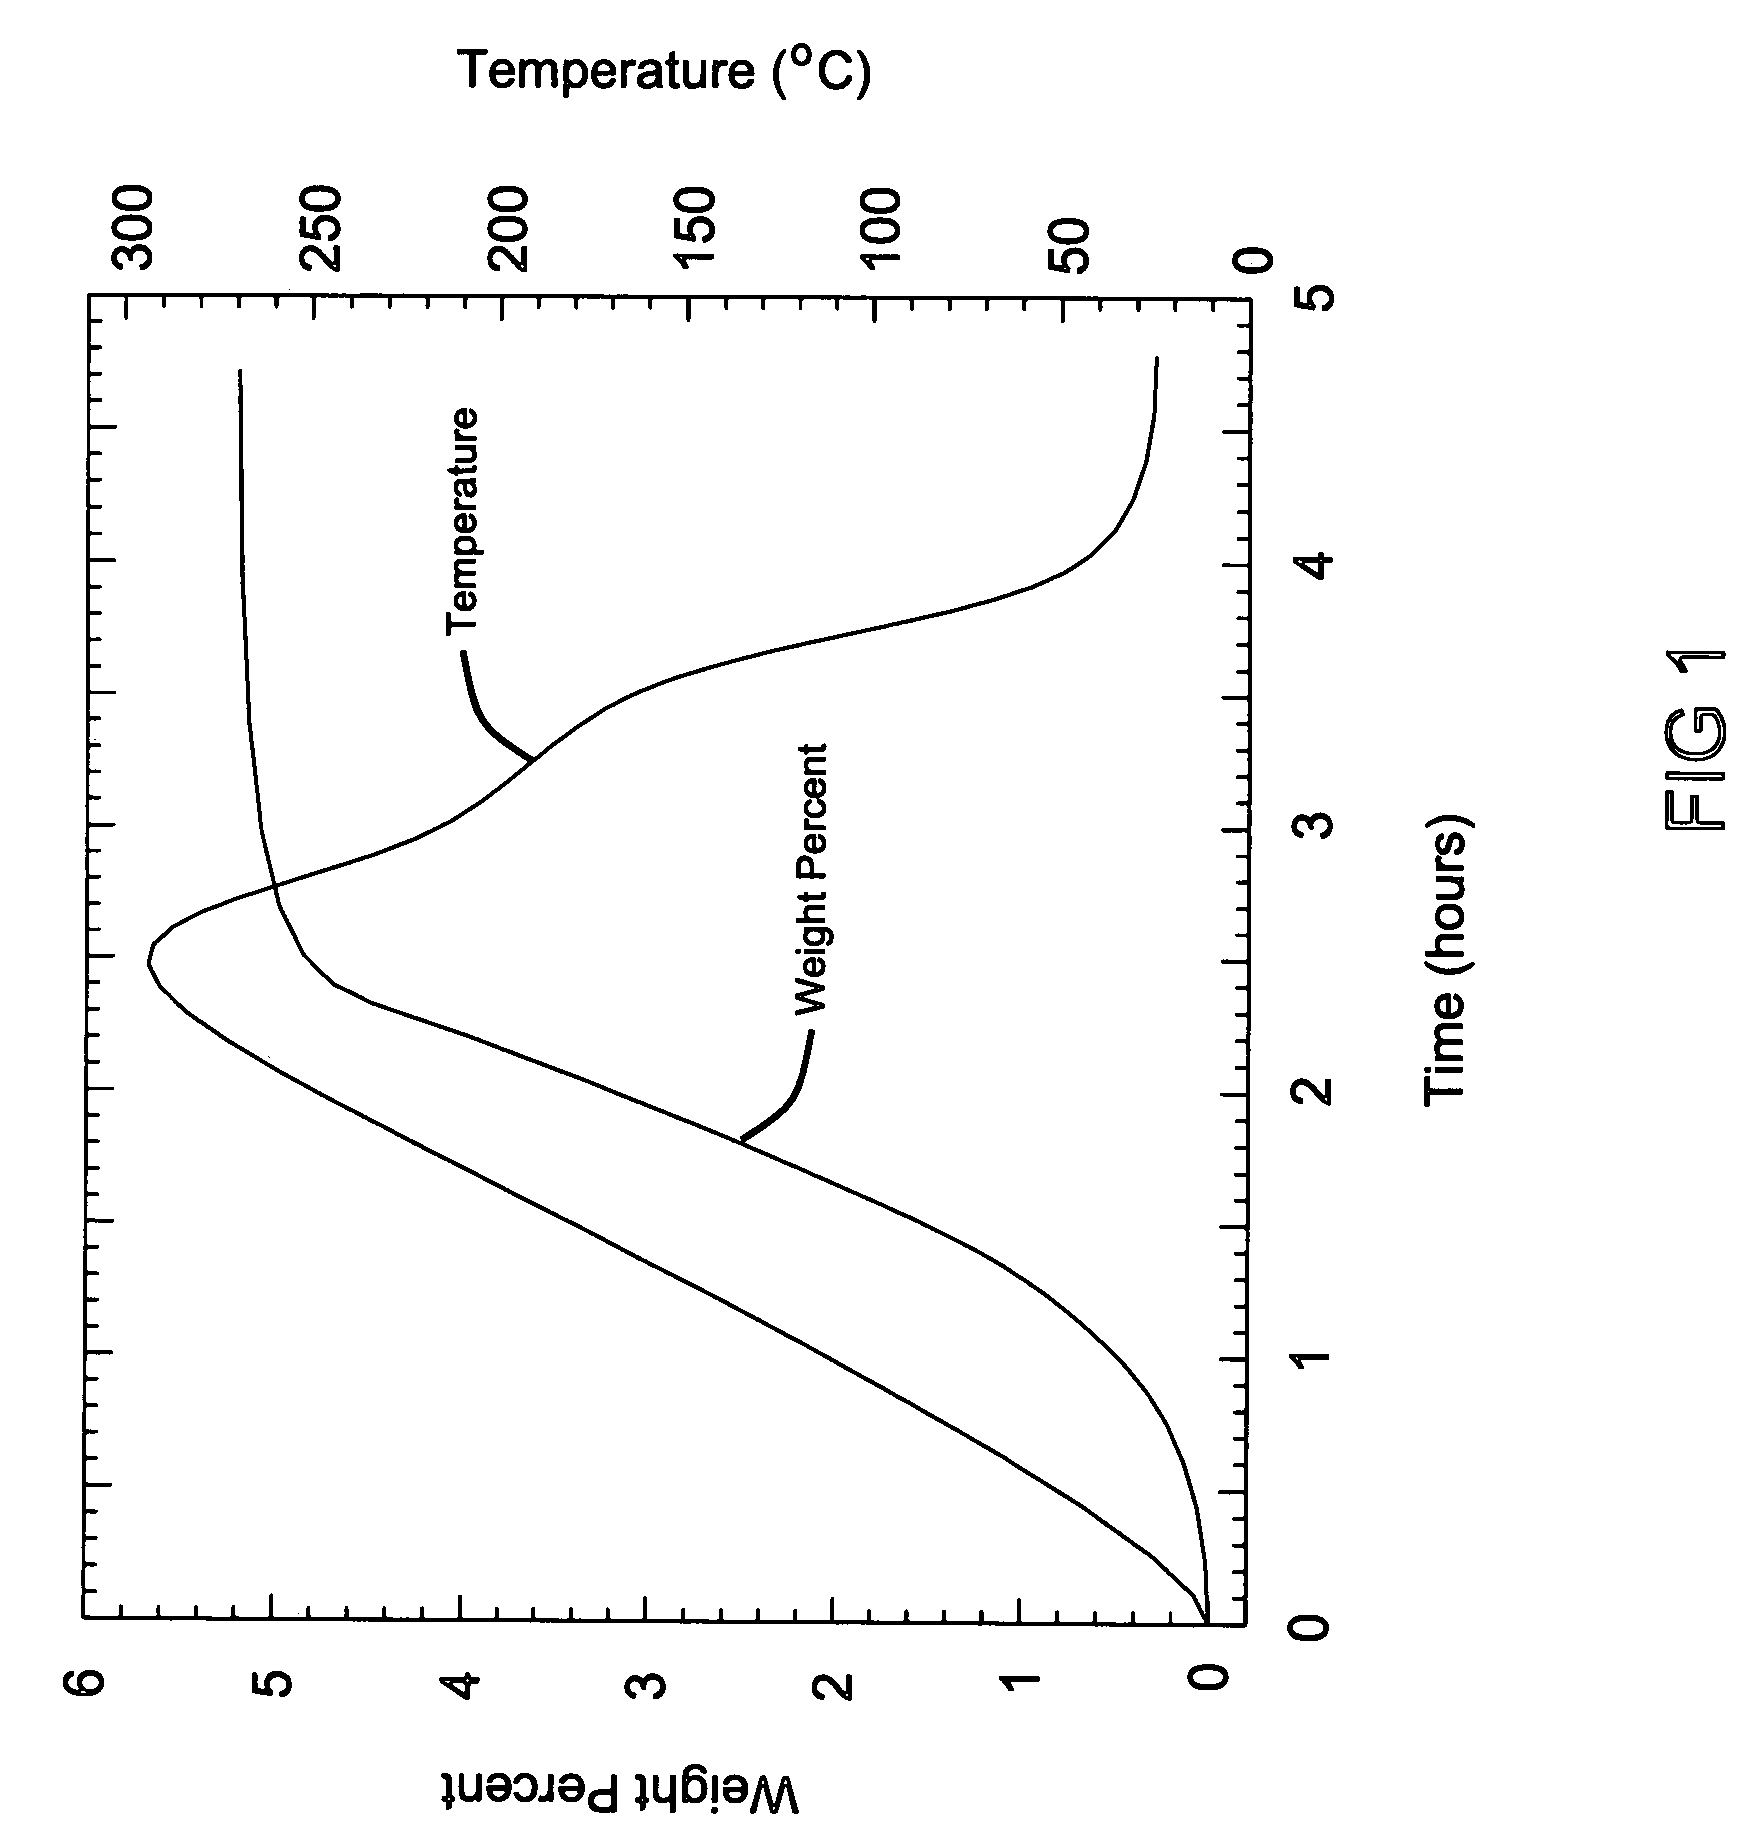 Regeneration of hydrogen storage system materials and methods including hydrides and hydroxides